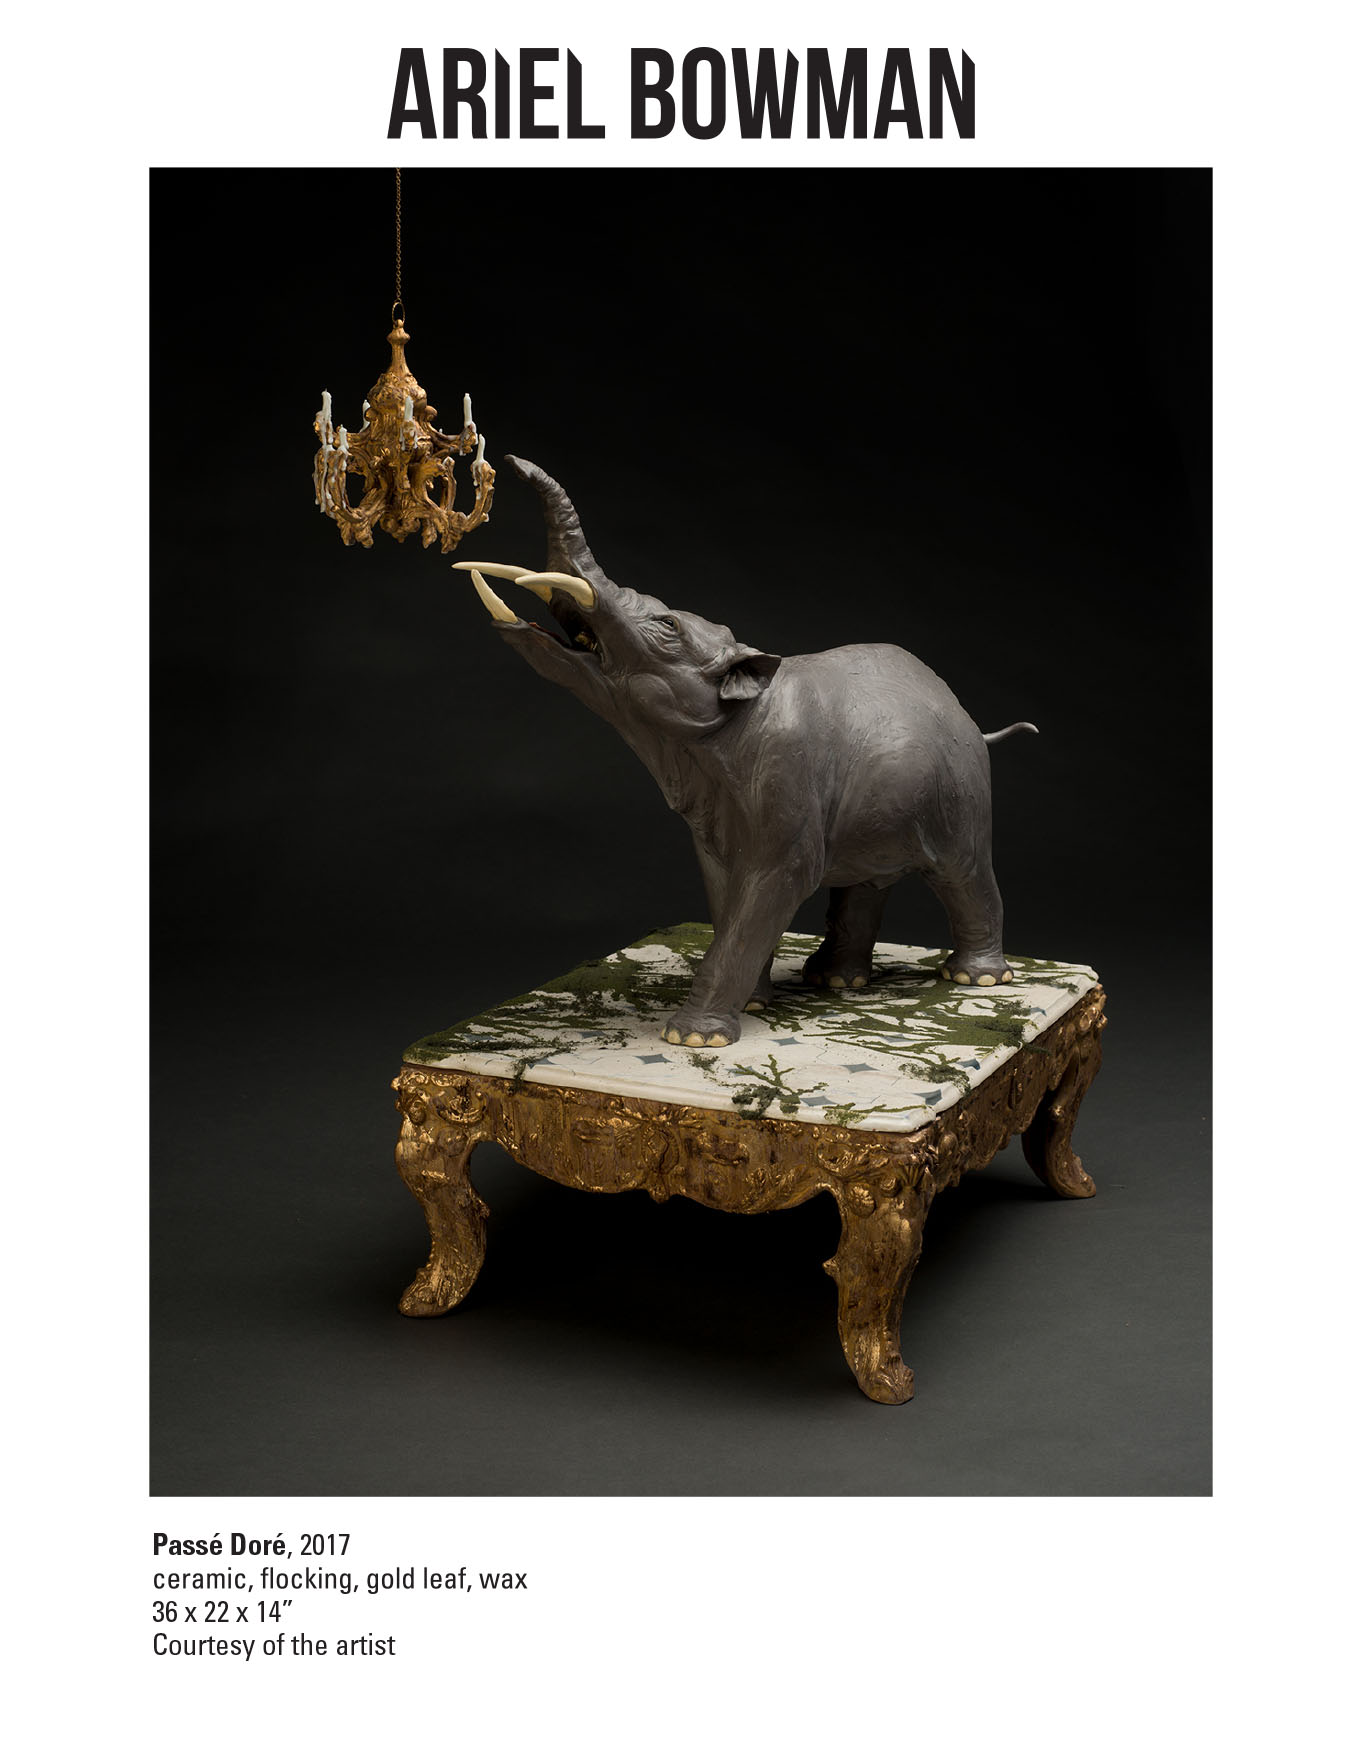 Ariel Bowman, Passe Dore, 2017. Ceramic, flocking, gold leaf, wax. 36 x 22 x 14" Courtesy of the artist. A large elephant like animal with three tusks pointing its head towards a chandelier while standing on a table with gold legs